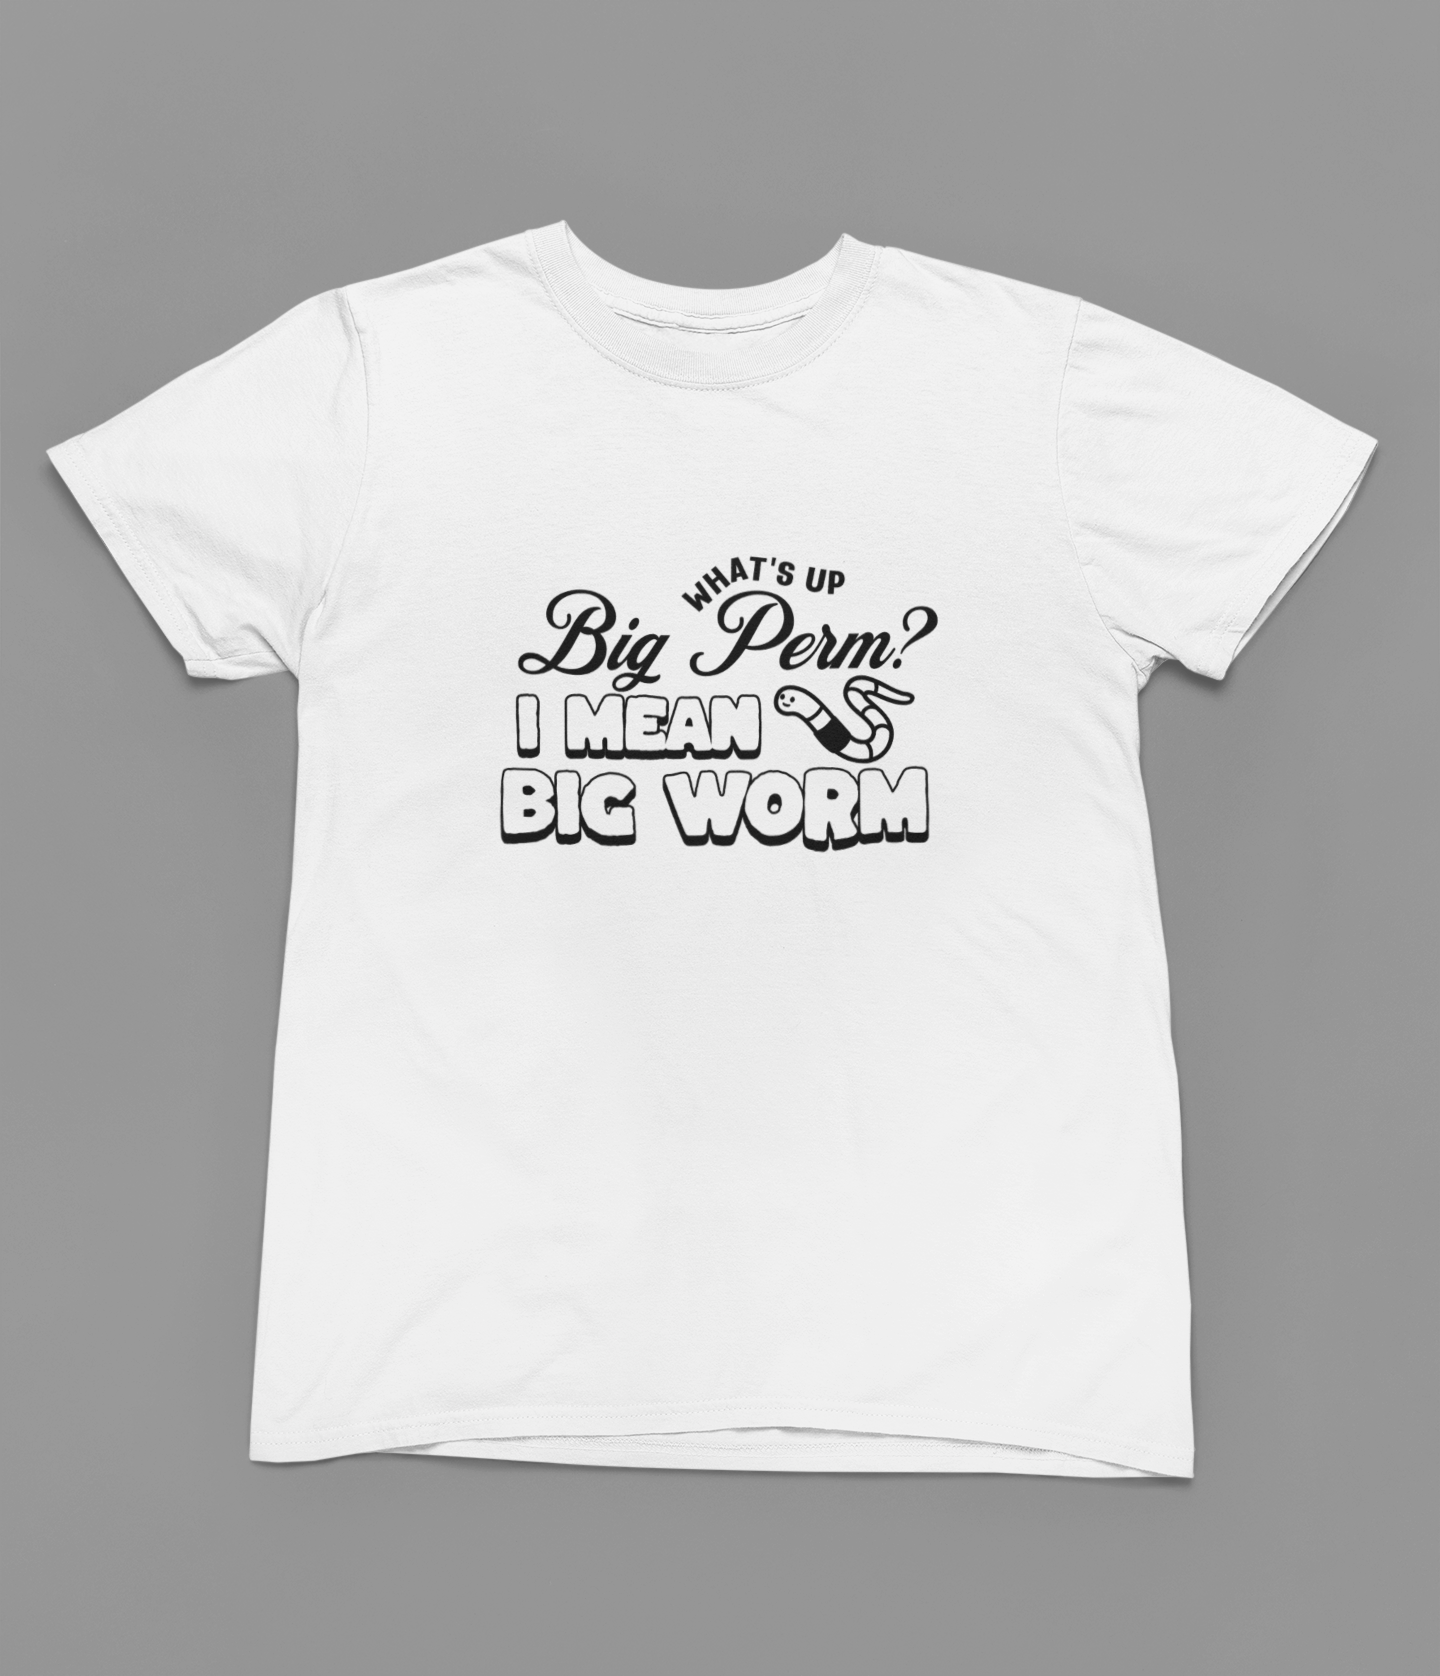 Big Worm Quote Friday Movie T-Shirt